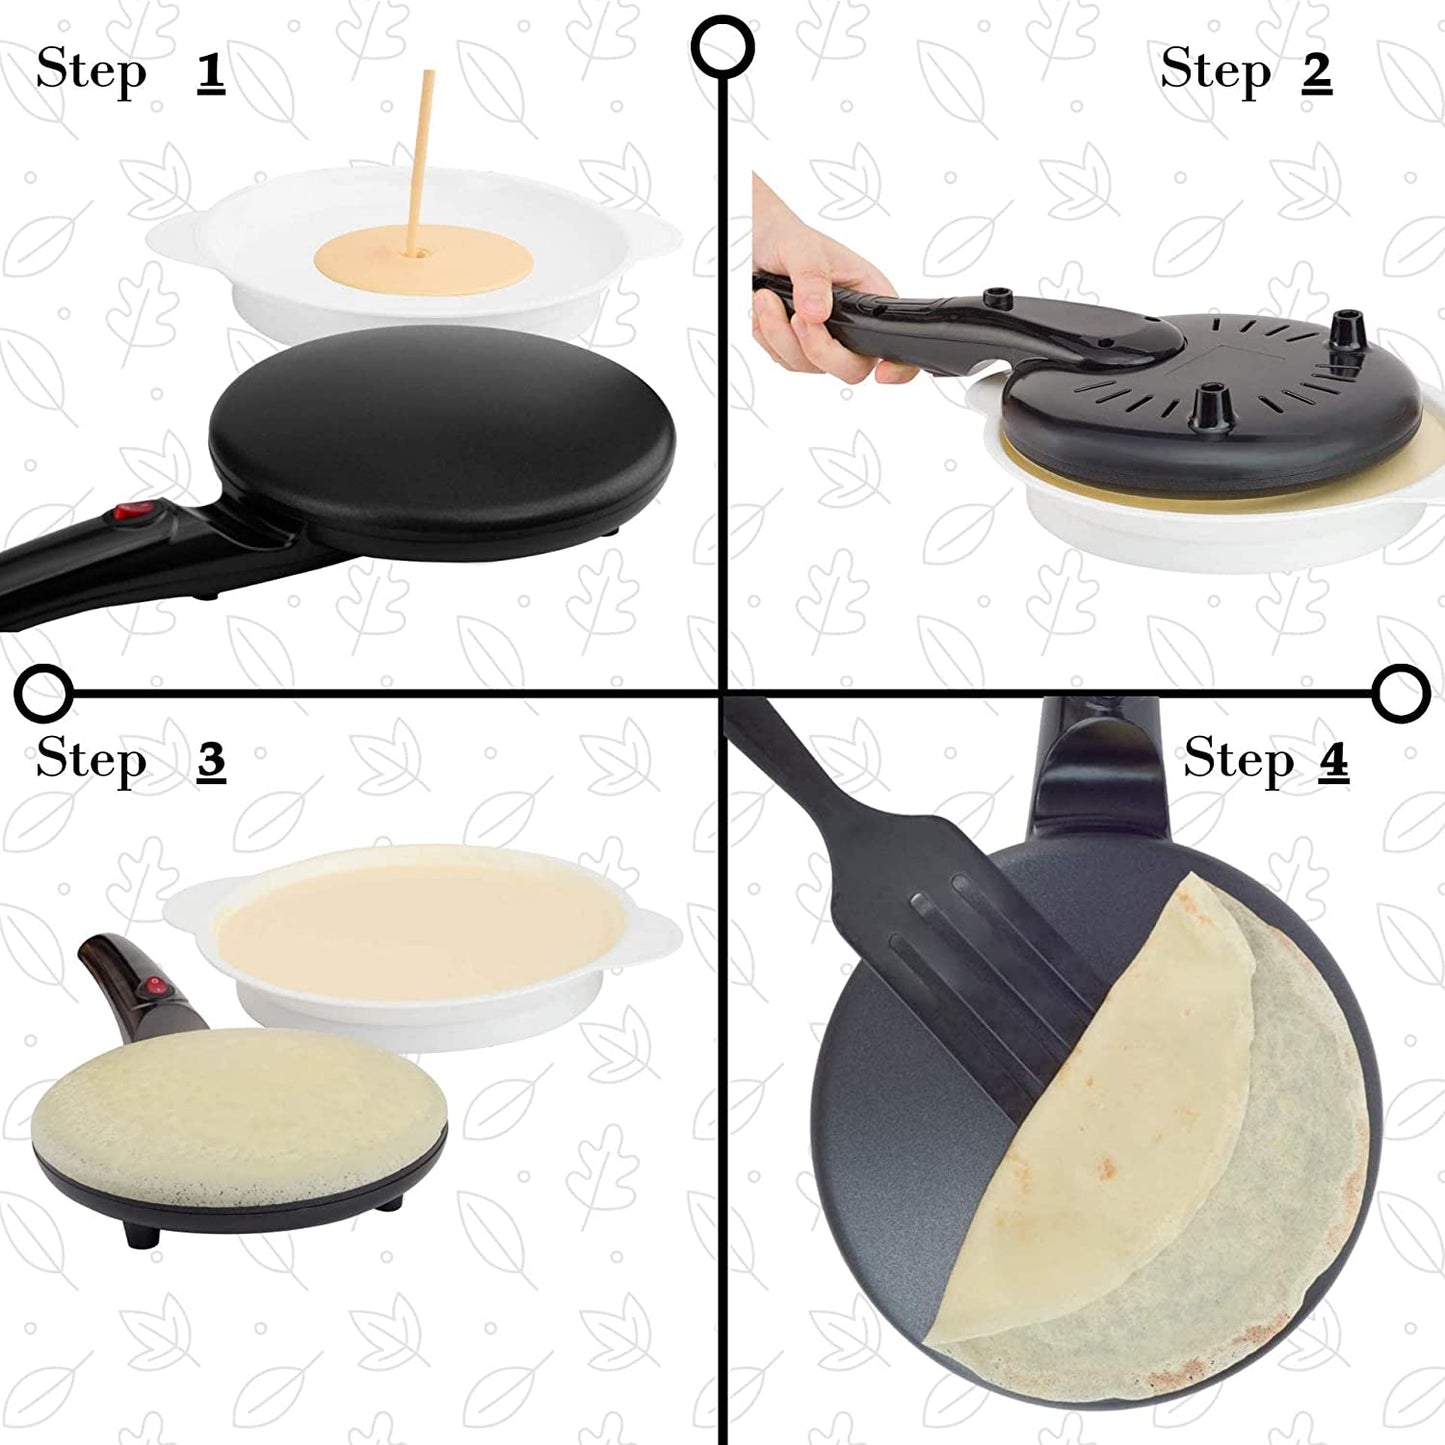 Portable Crepe Maker & Non-Stick Dipping Plate - ZHOFT